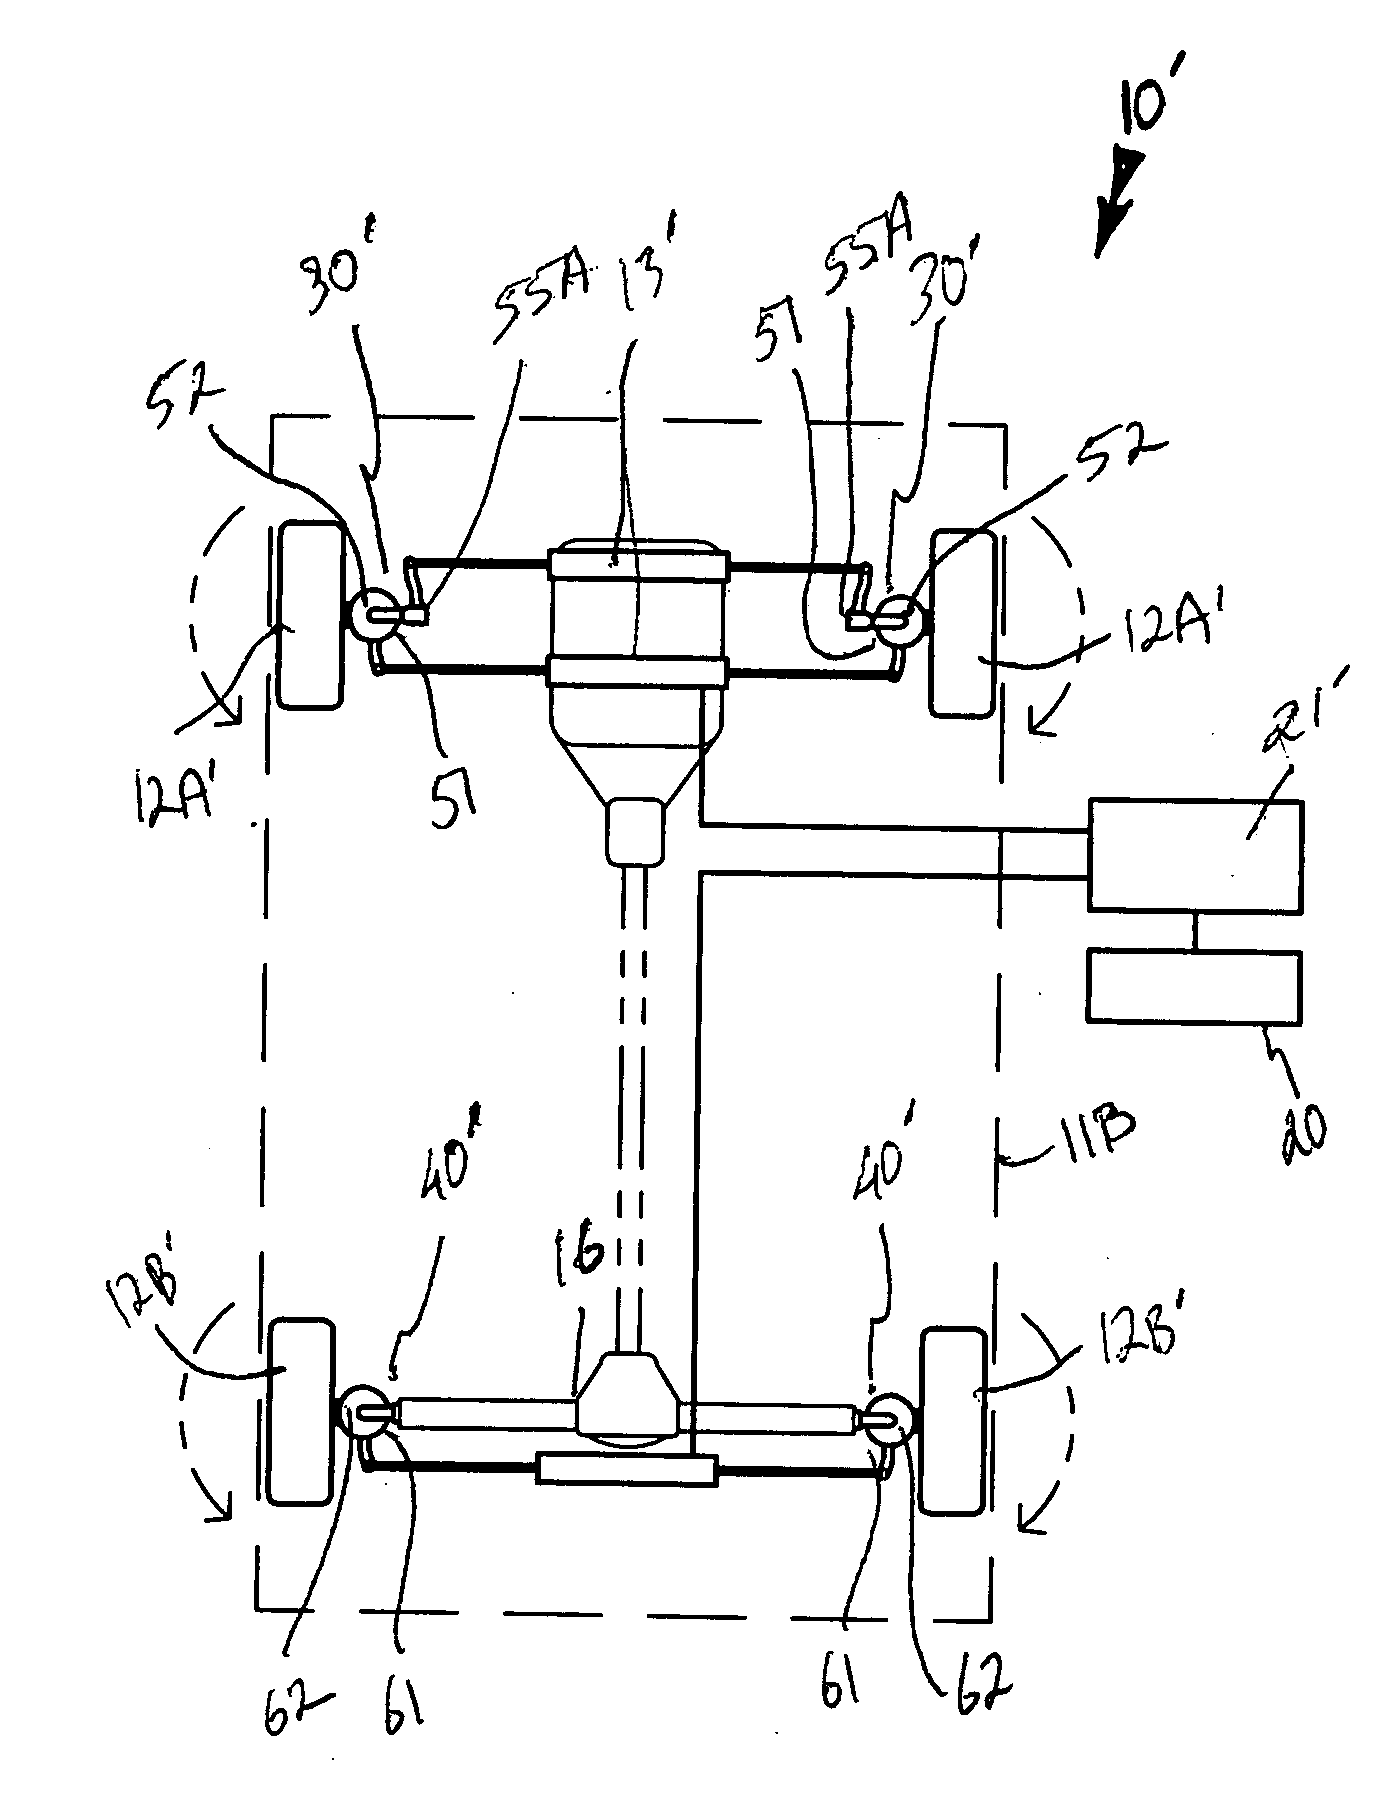 Auxiliary steering system for vehicles